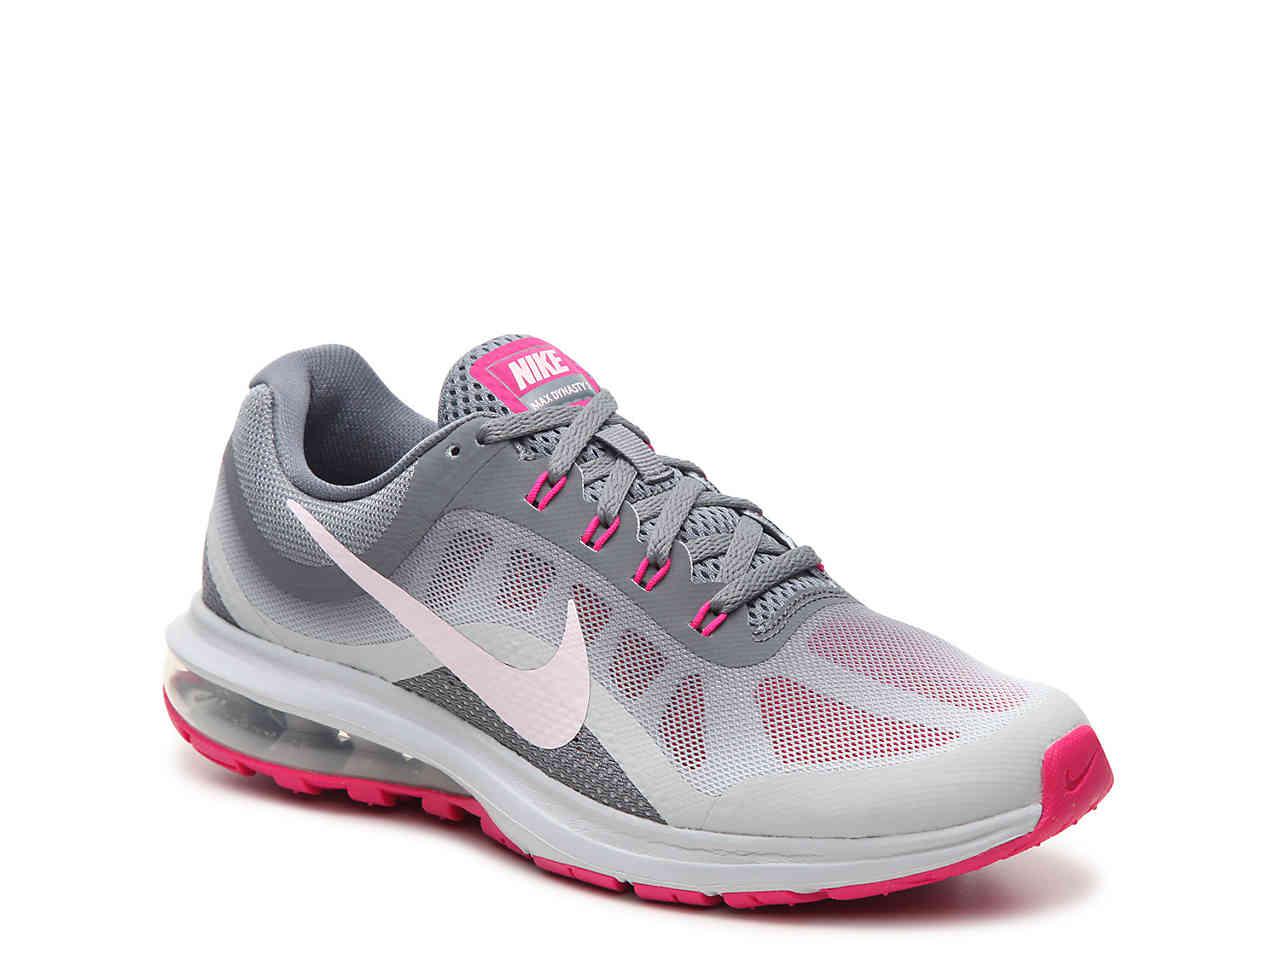 nike air max dynasty 2 women's running shoes review